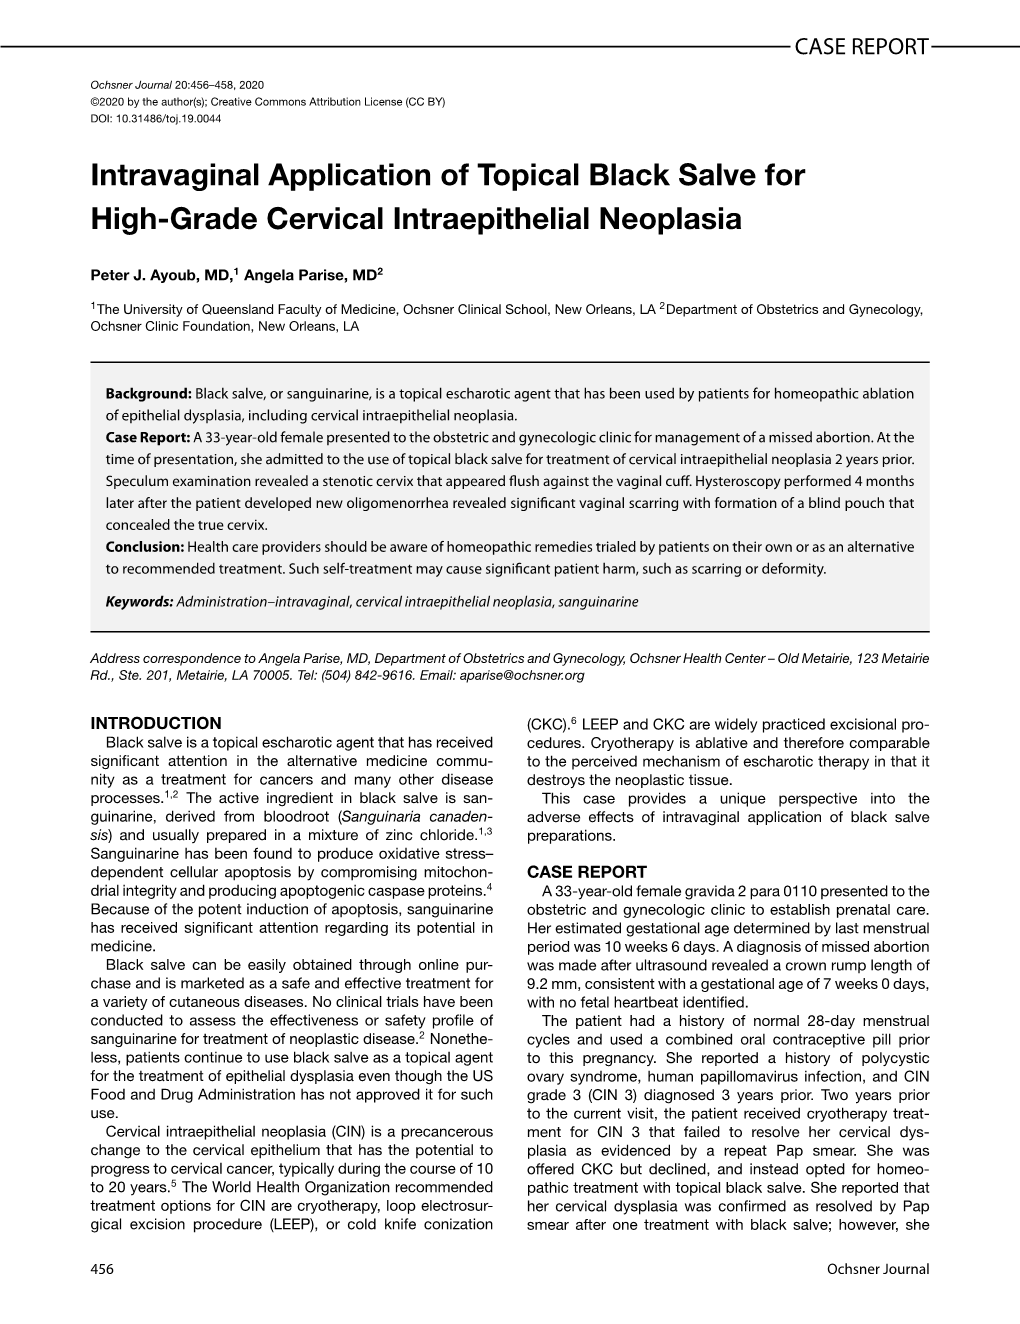 Intravaginal Application of Topical Black Salve for High-Grade Cervical Intraepithelial Neoplasia